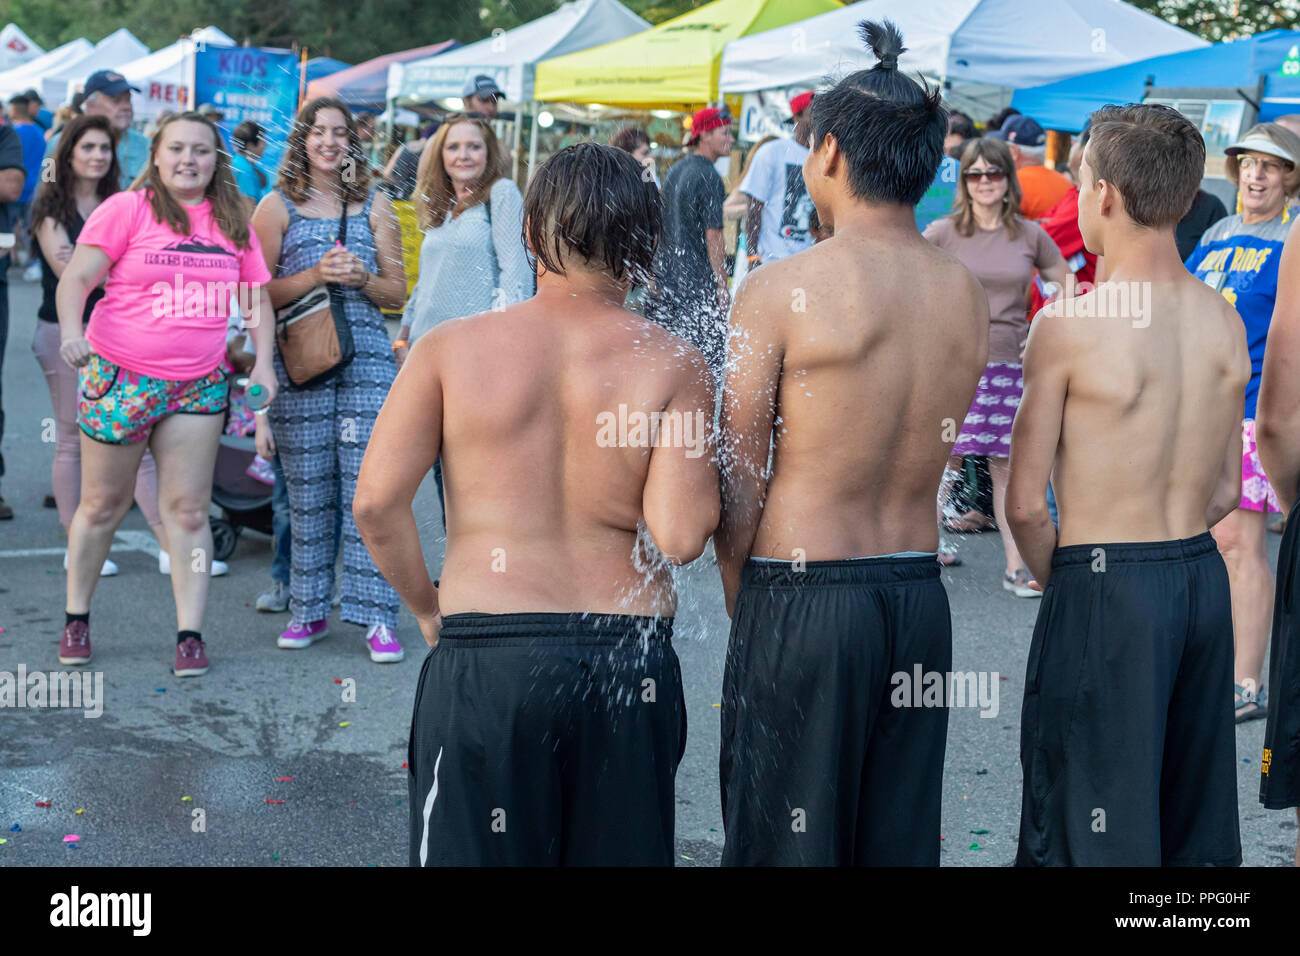 Wheat Ridge, Colorado - High school boys get pelted with water balloons as a charity fundraiser during the annual Carnation Festival. The festival fea Stock Photo